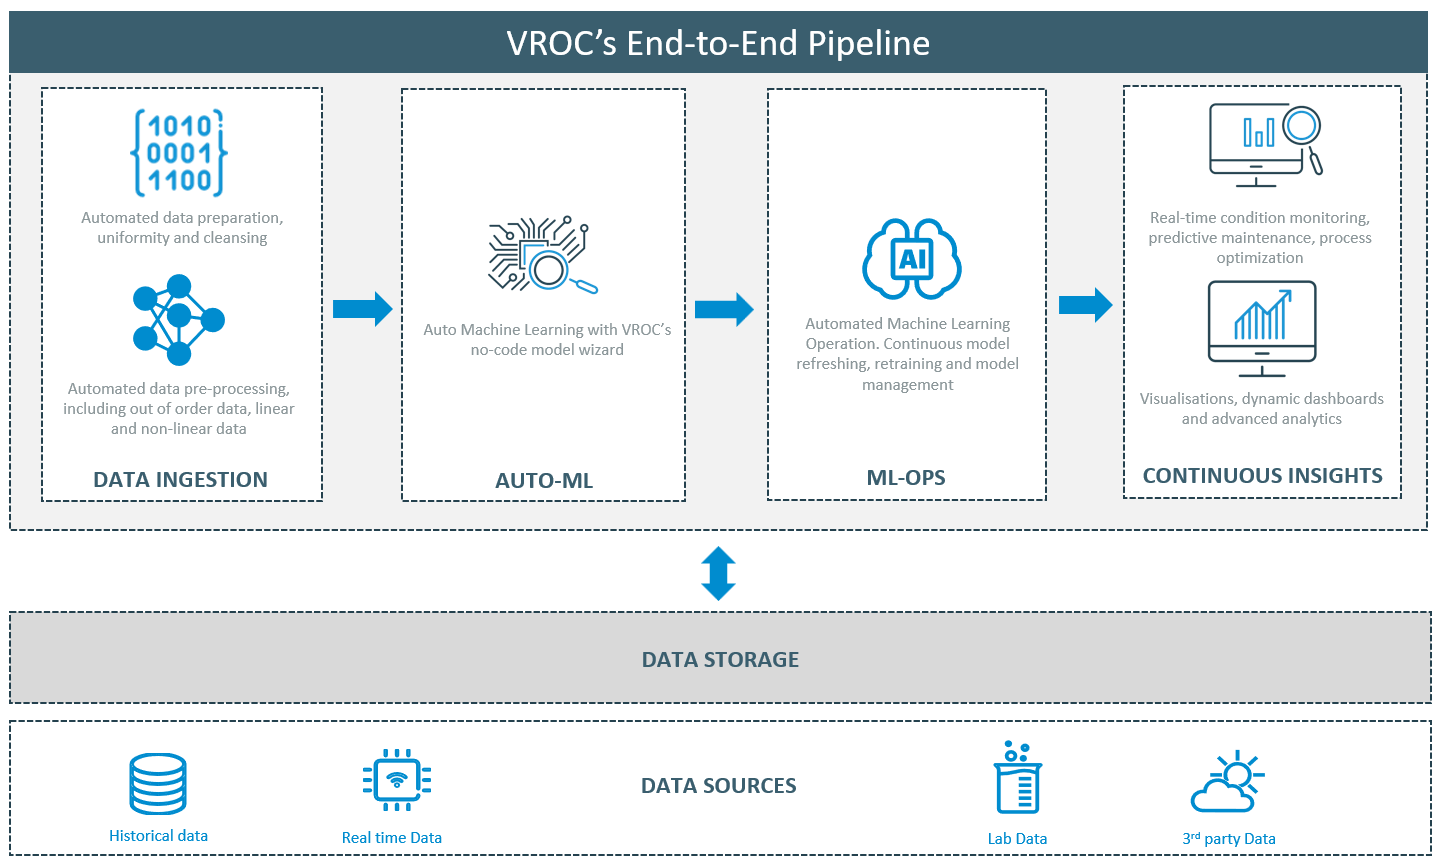 VROC's unique end-to-end ML pipeline include AutoML and MLOps capability